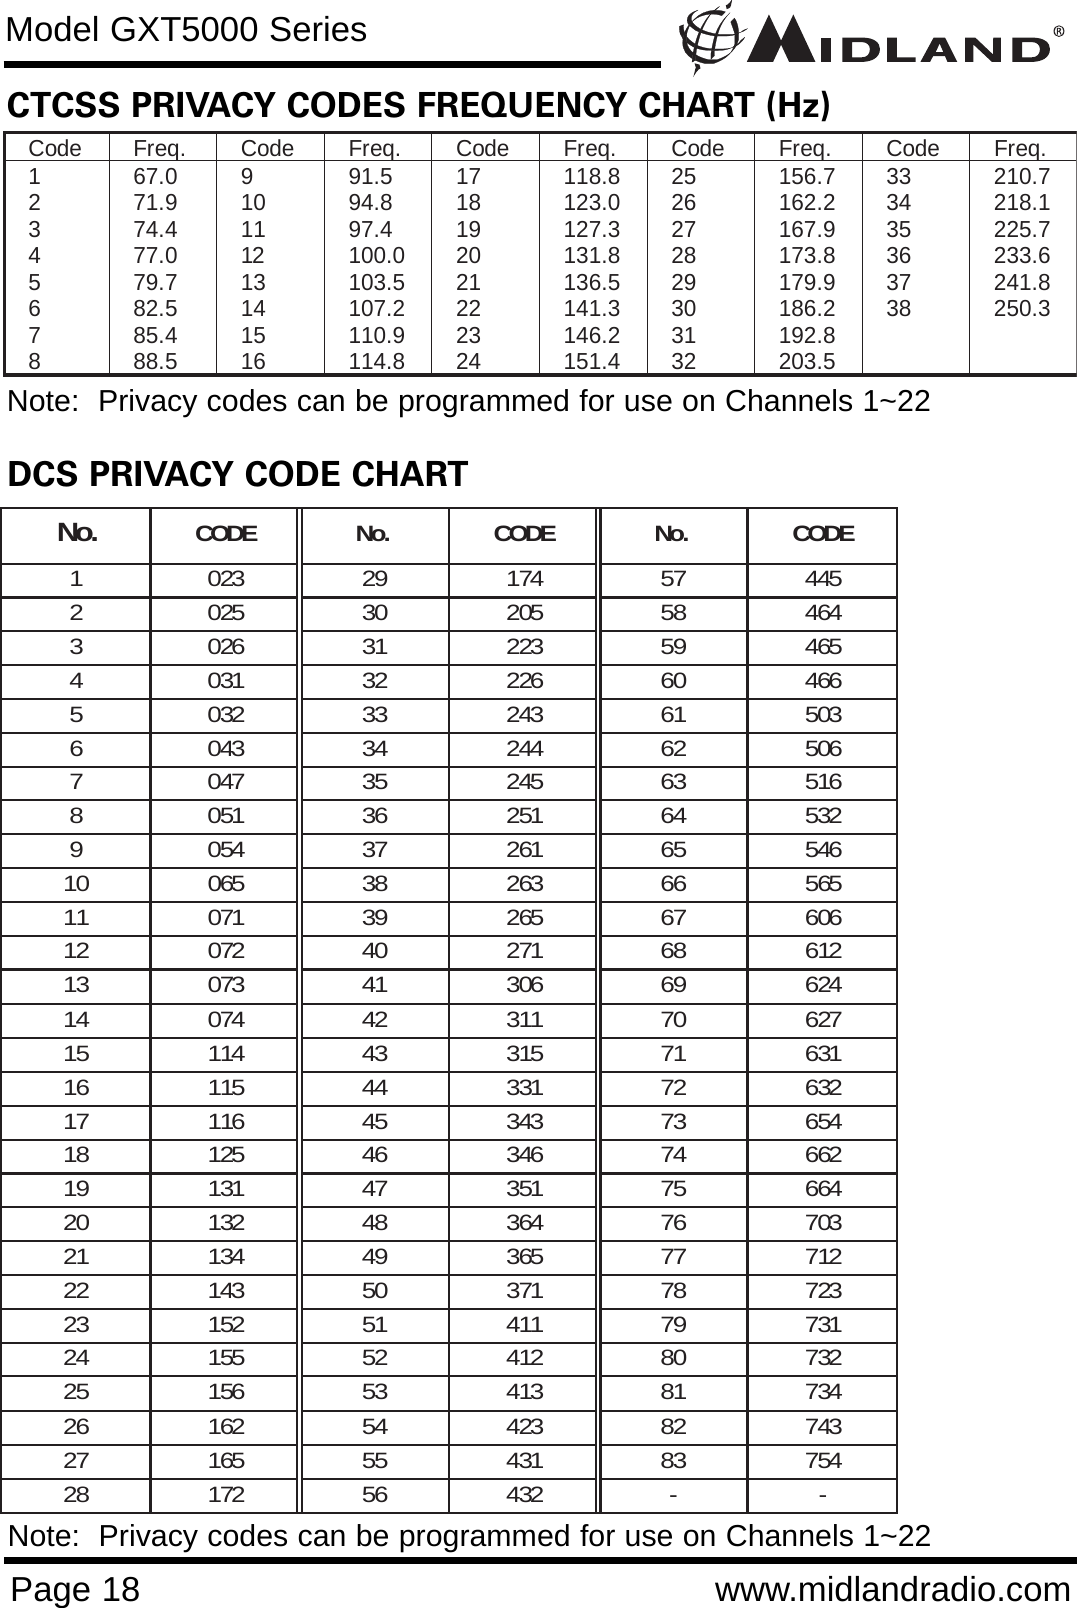 Page 18 www.midlandradio.comModel GXT5000 SeriesDCS PRIVACY CODE CHART No. CODE No. CODE No. CODE 1 023 29 174 57 445 2 025 30 205 58 464 3 026 31 223 59 465 4 031 32 226 60 466 5 032 33 243 61 503 6 043 34 244 62 506 7 047 35 245 63 516 8 051 36 251 64 532 9 054 37 261 65 546 10 065 38 263 66 565 11 071 39 265 67 606 12 072 40 271 68 612 13 073 41 306 69 624 14 074 42 311 70 627 15 114 43 315 71 631 16 115 44 331 72 632 17 116 45 343 73 654 18 125 46 346 74 662 19 131 47 351 75 664 20 132 48 364 76 703 21 134 49 365 77 712 22 143 50 371 78 723 23 152 51 411 79 731 24 155 52 412 80 732 25 156 53 413 81 734 26 162 54 423 82 743 27 165 55 431 83 754 28 172 56 432  -  - Note:  Privacy codes can be programmed for use on Channels 1~22CTCSS PRIVACY CODES FREQUENCY CHART (Hz)Code Freq.  Code Freq.  Code Freq.  Code Freq.  Code Freq.  1  67.0 9  91.5 17  118.8 25  156.7 33  210.7 2  71.9 10  94.8 18  123.0 26  162.2 34  218.1 3  74.4 11  97.4 19  127.3 27  167.9 35  225.7 4 77.0 12 100.0 20  131.8 28  173.8 36  233.6 5 79.7 13 103.5 21  136.5 29  179.9 37  241.8 6 82.5 14 107.2 22  141.3 30  186.2 38  250.3 7 85.4 15 110.9 23  146.2 31  192.8    8 88.5 16 114.8 24  151.4 32  203.5    Note:  Privacy codes can be programmed for use on Channels 1~22 